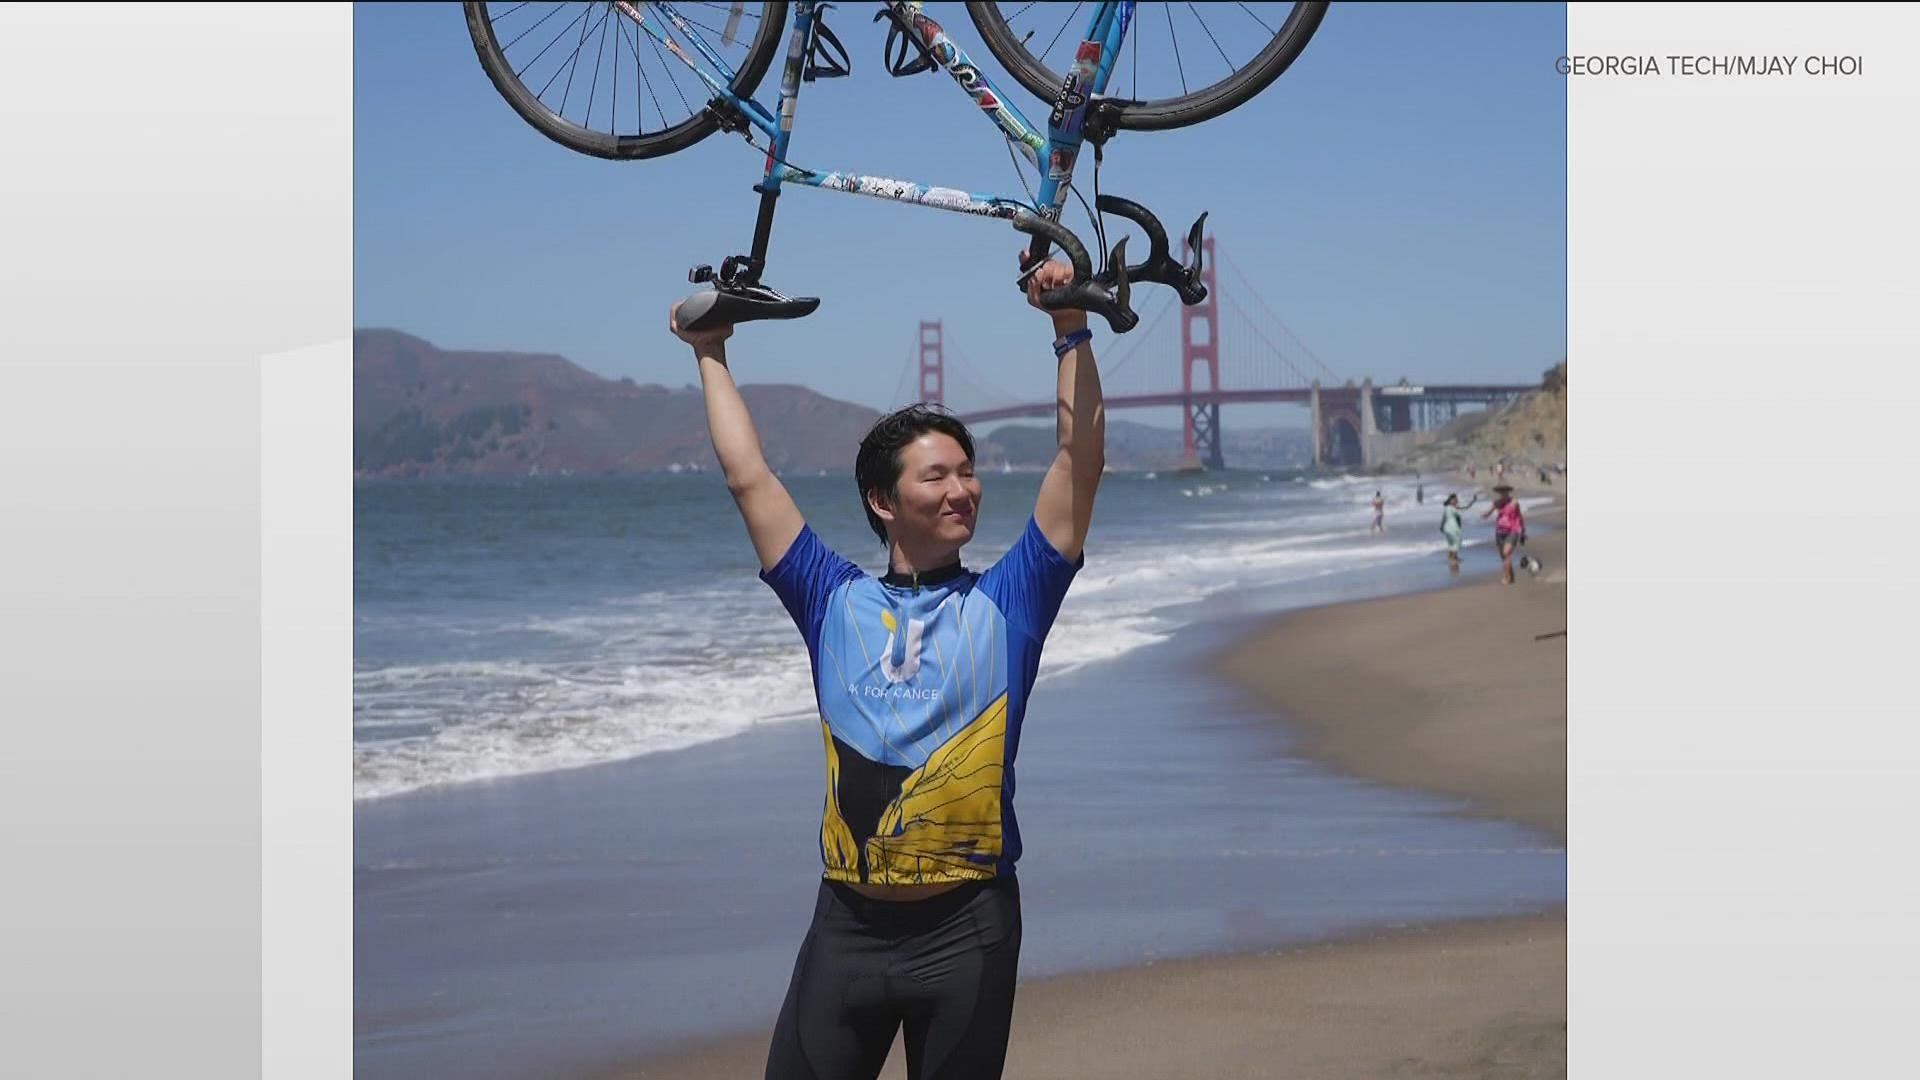 Myeongjun Choi rode 4,000 miles from Maryland to California to raise awareness and money for the Ulman Foundation.